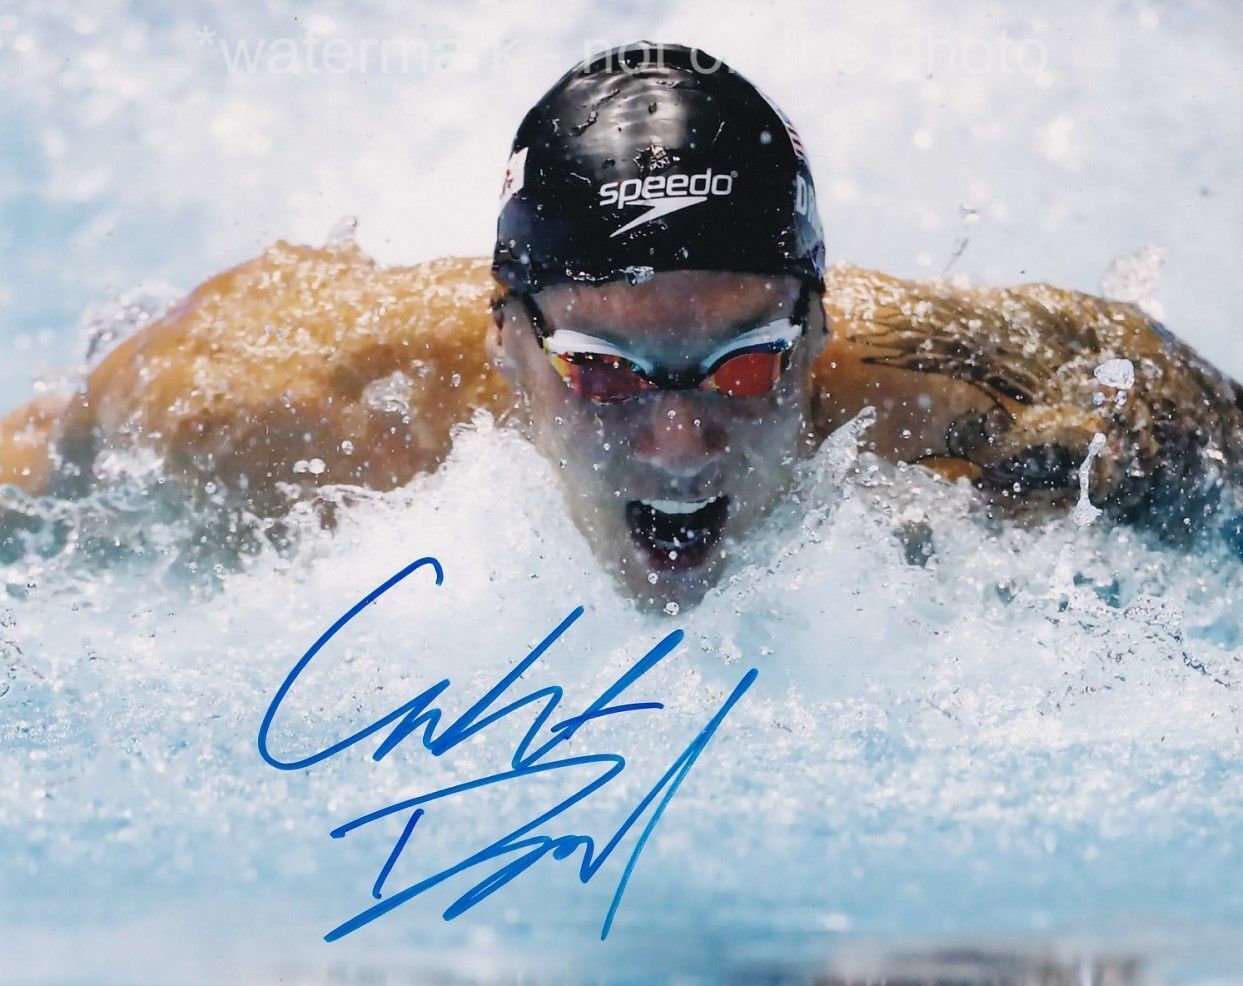 CAELEB DRESSEL SIGNED AUTOGRAPH 8X10 Photo Poster painting OLYMPICS